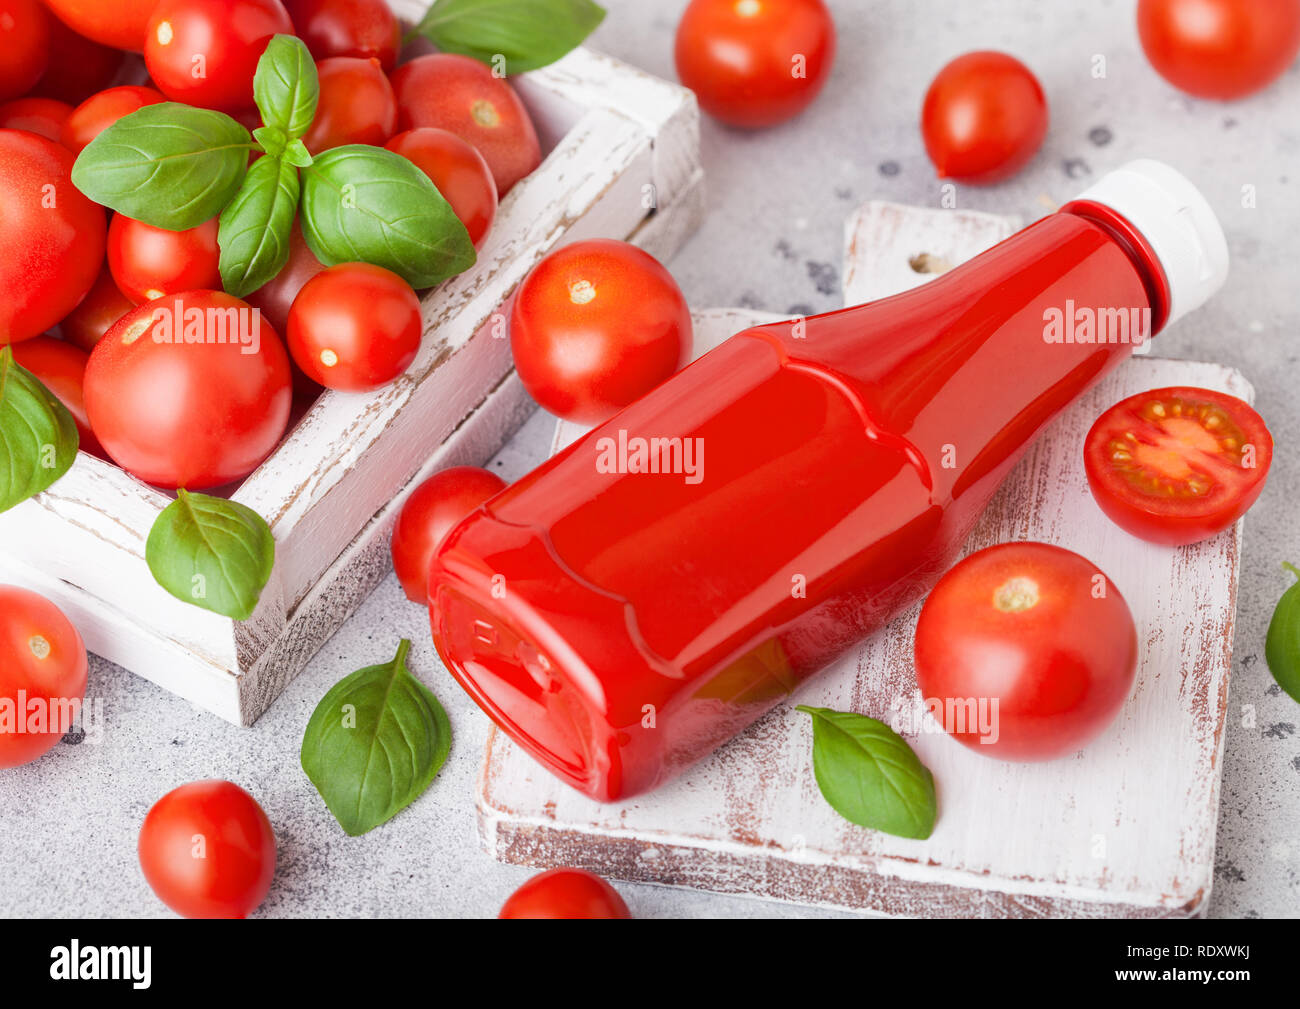 Download Plastic Container With Tomato Ketchup Sauce With Raw Tomatoes On Kitchen Background Stock Photo Alamy